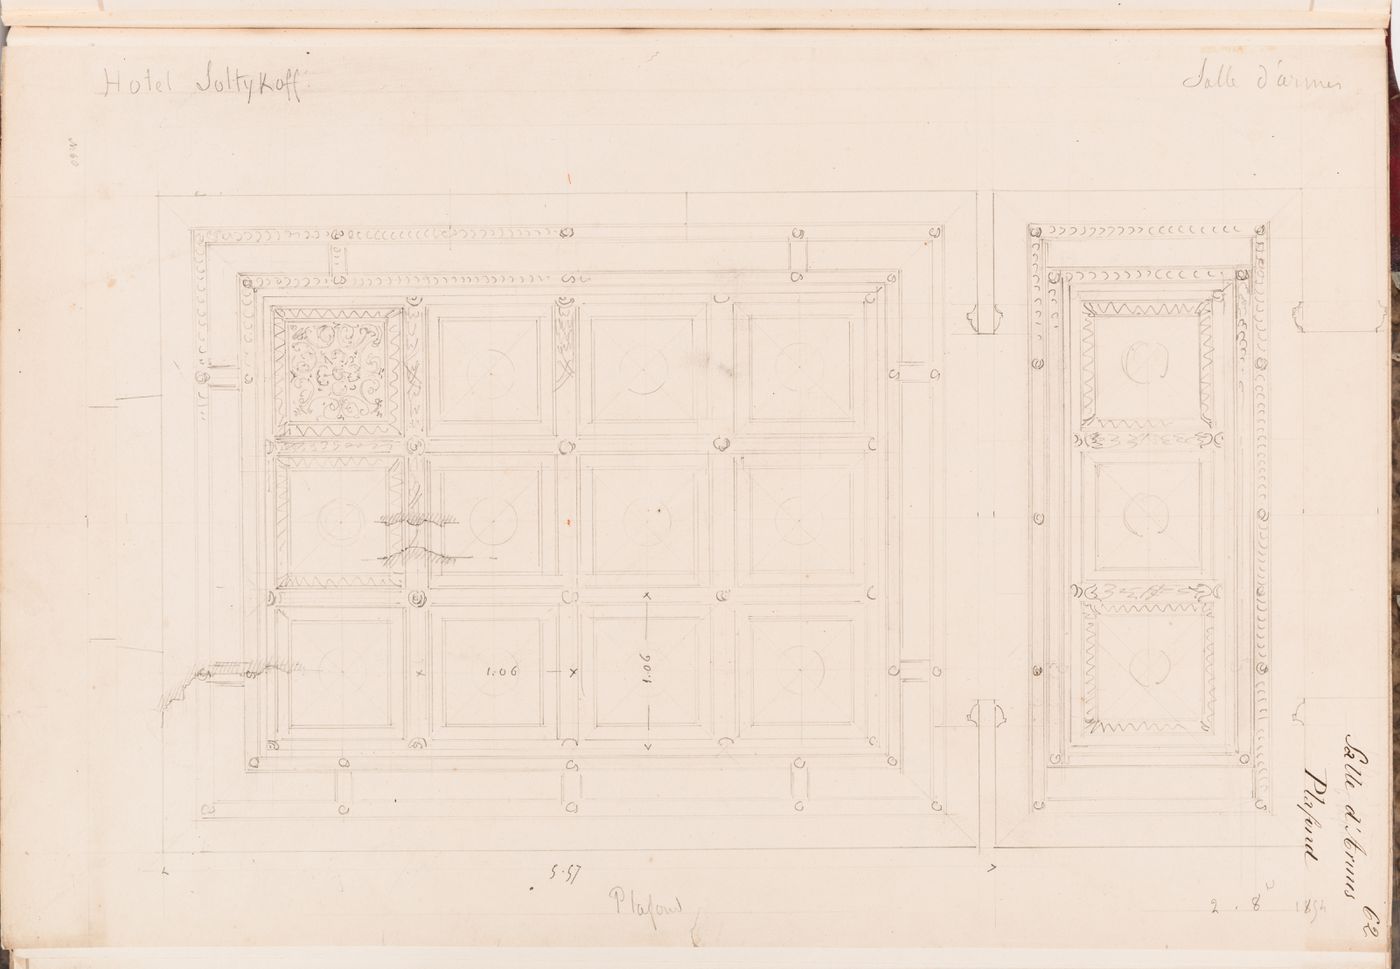 Reflected ceiling plan for the "salle d"armes" on the second floor, Hôtel Soltykoff